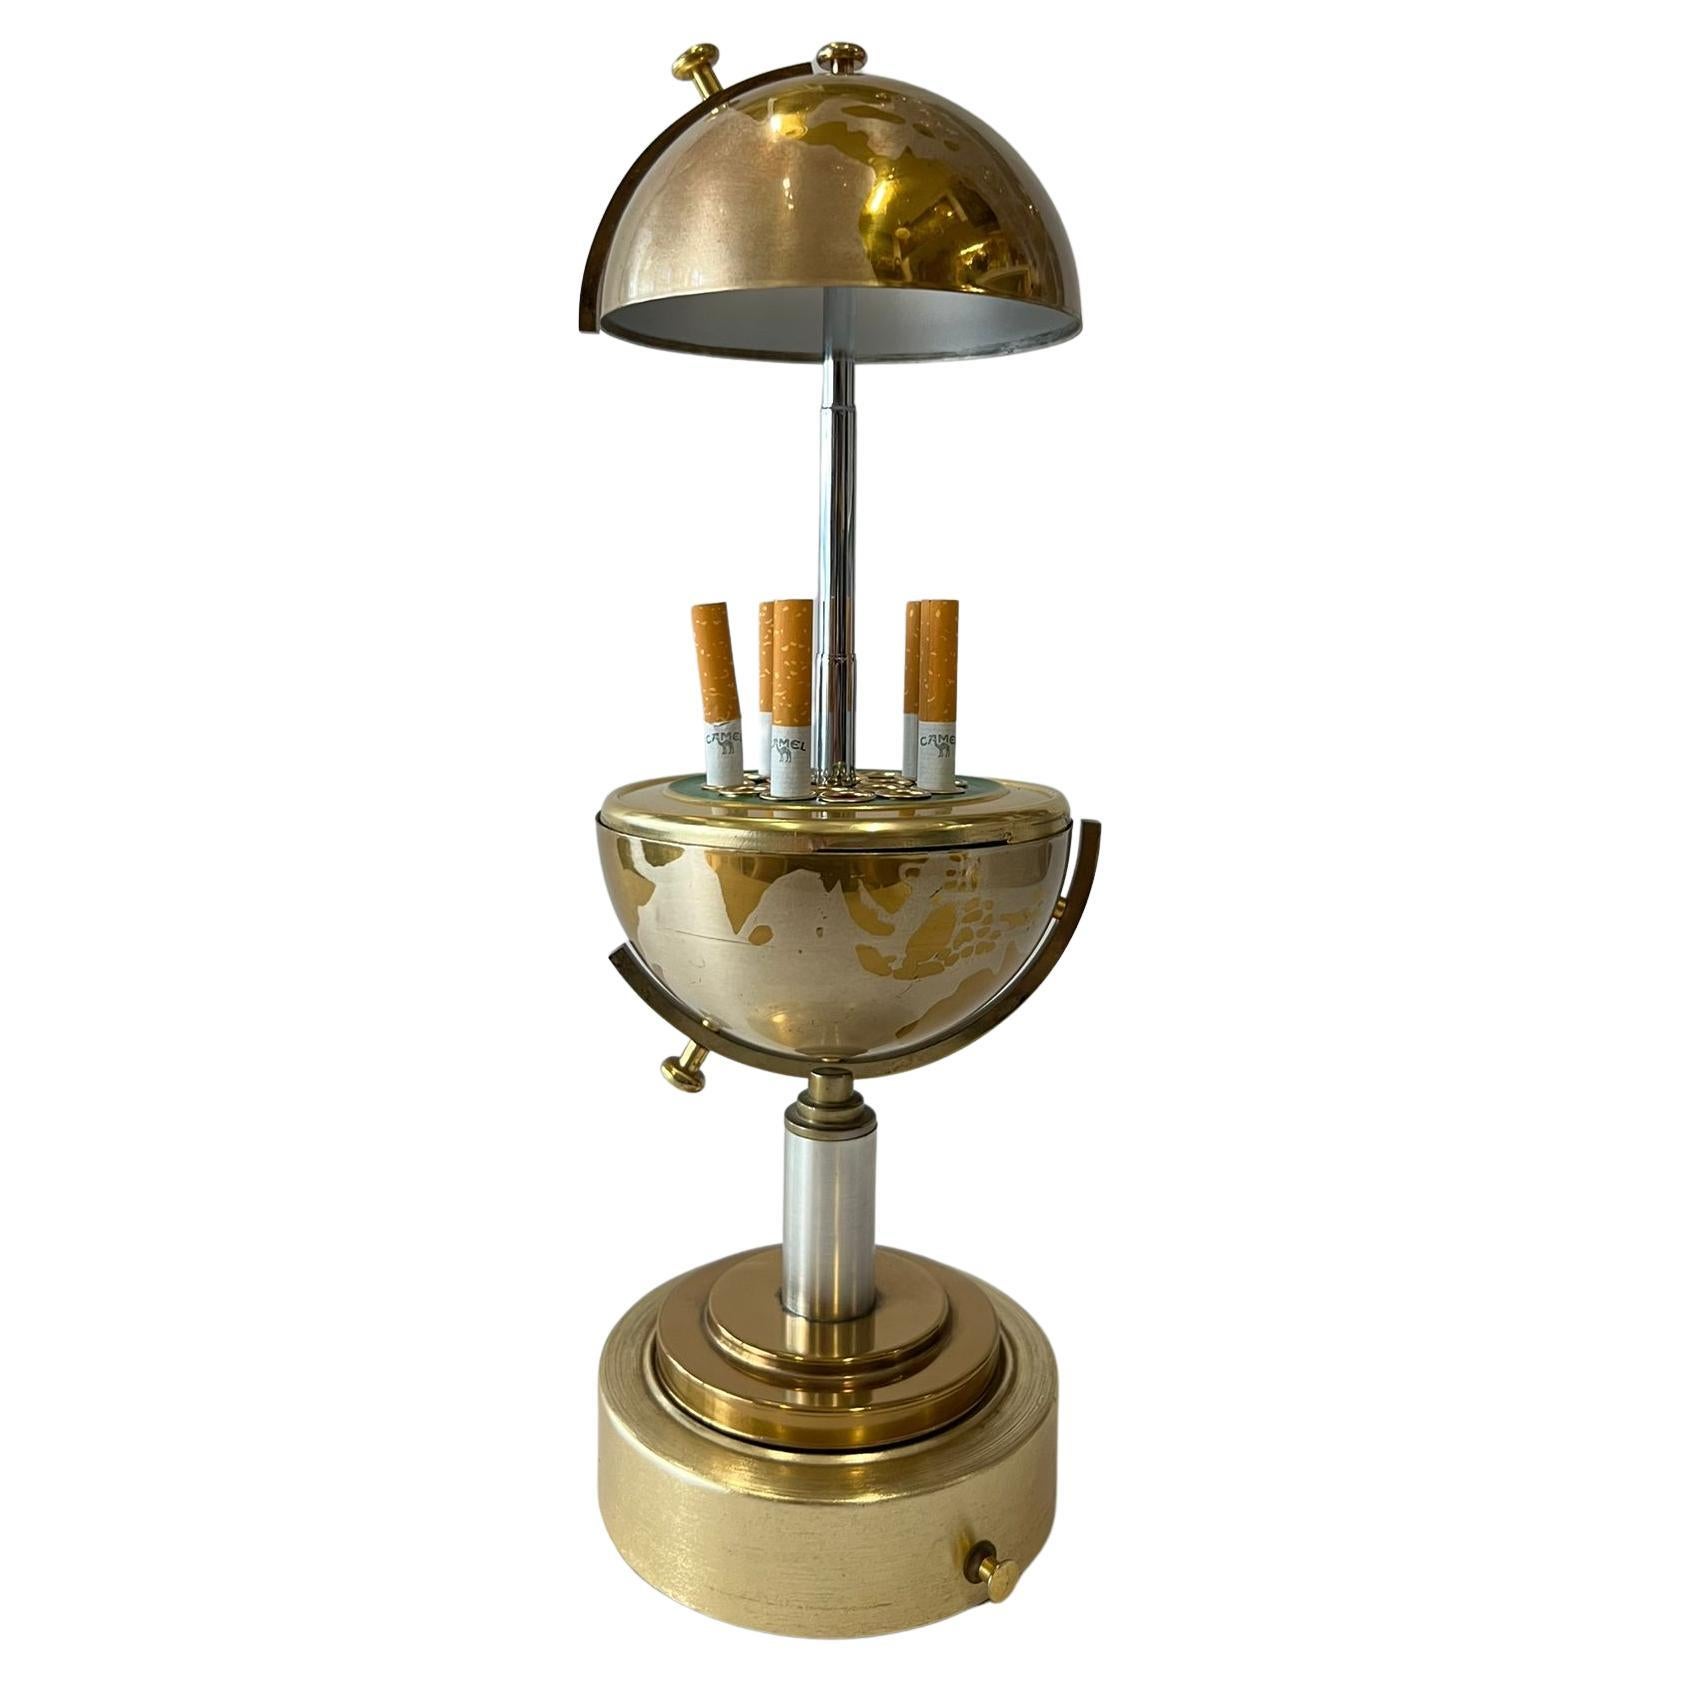 Globe Cigarette Dispenser with Music Playing Globe Lighter, Brass, Germany, 1950 For Sale 2